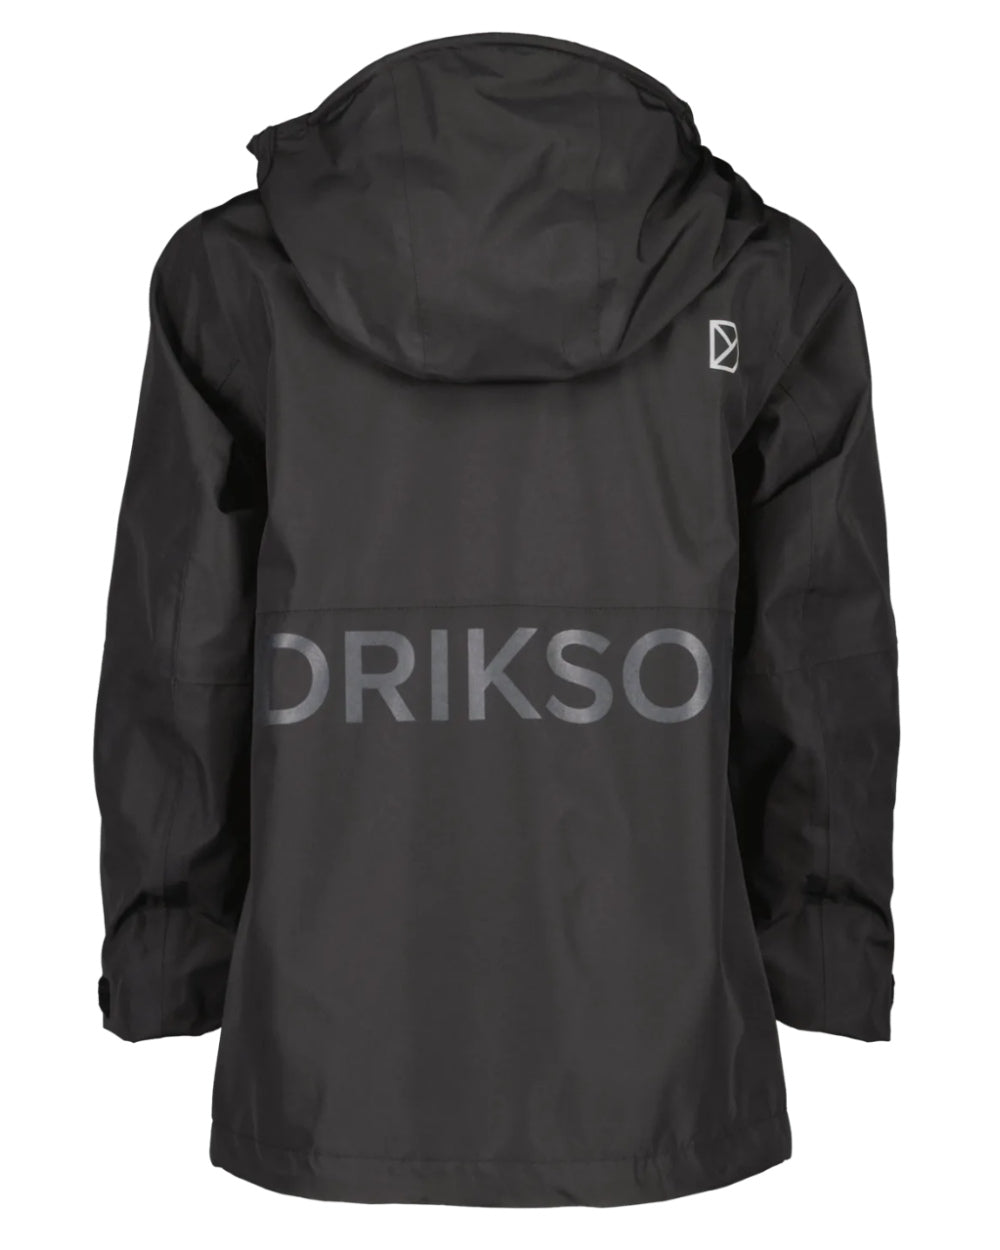 Black Coloured Didriksons Piko Childrens Jacket On A White Background 